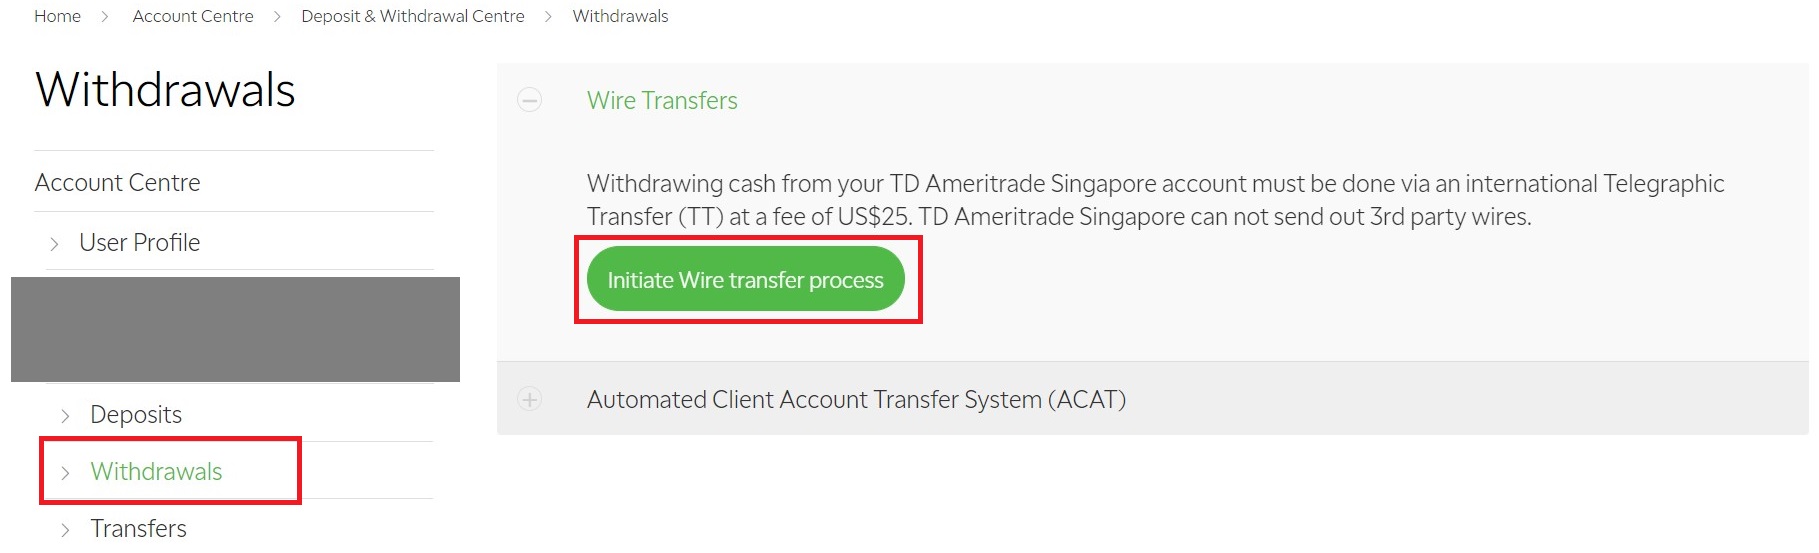 We can initiate a wire transfer from TD Ameritrade Singapore at Account Centre > Withdrawals